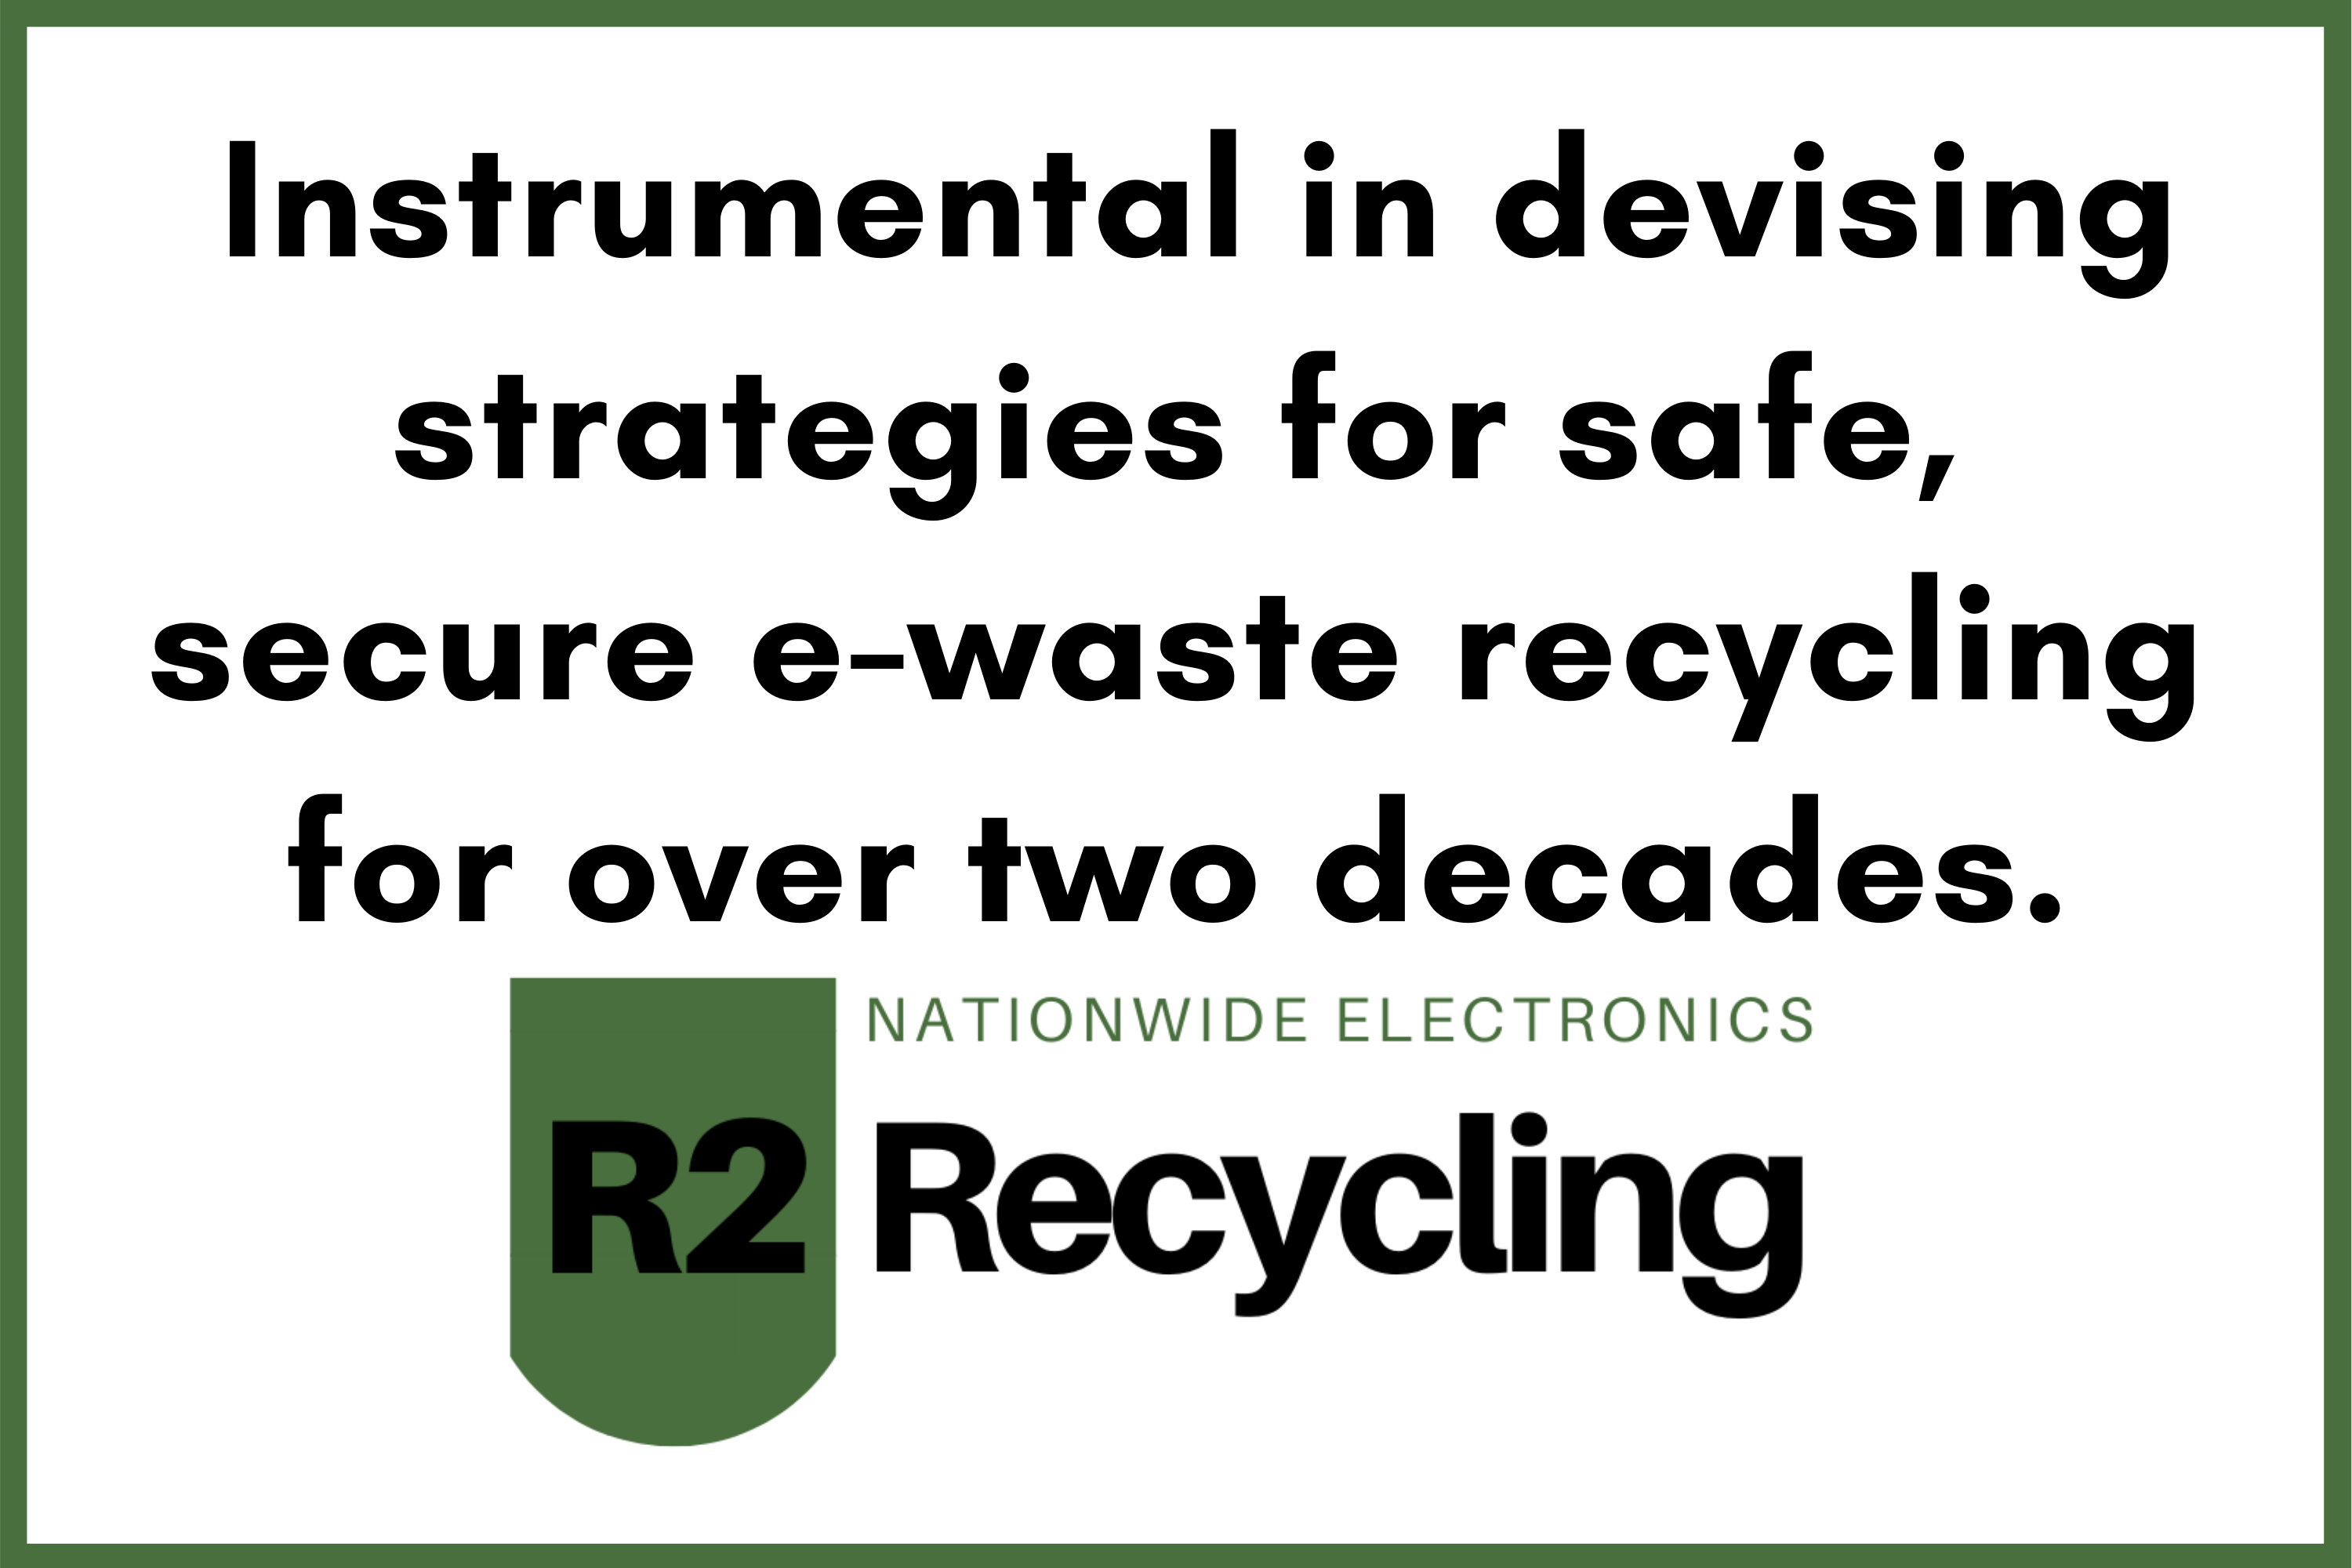 R2 Recycling: Nationwide Computer & Laptop Recycling